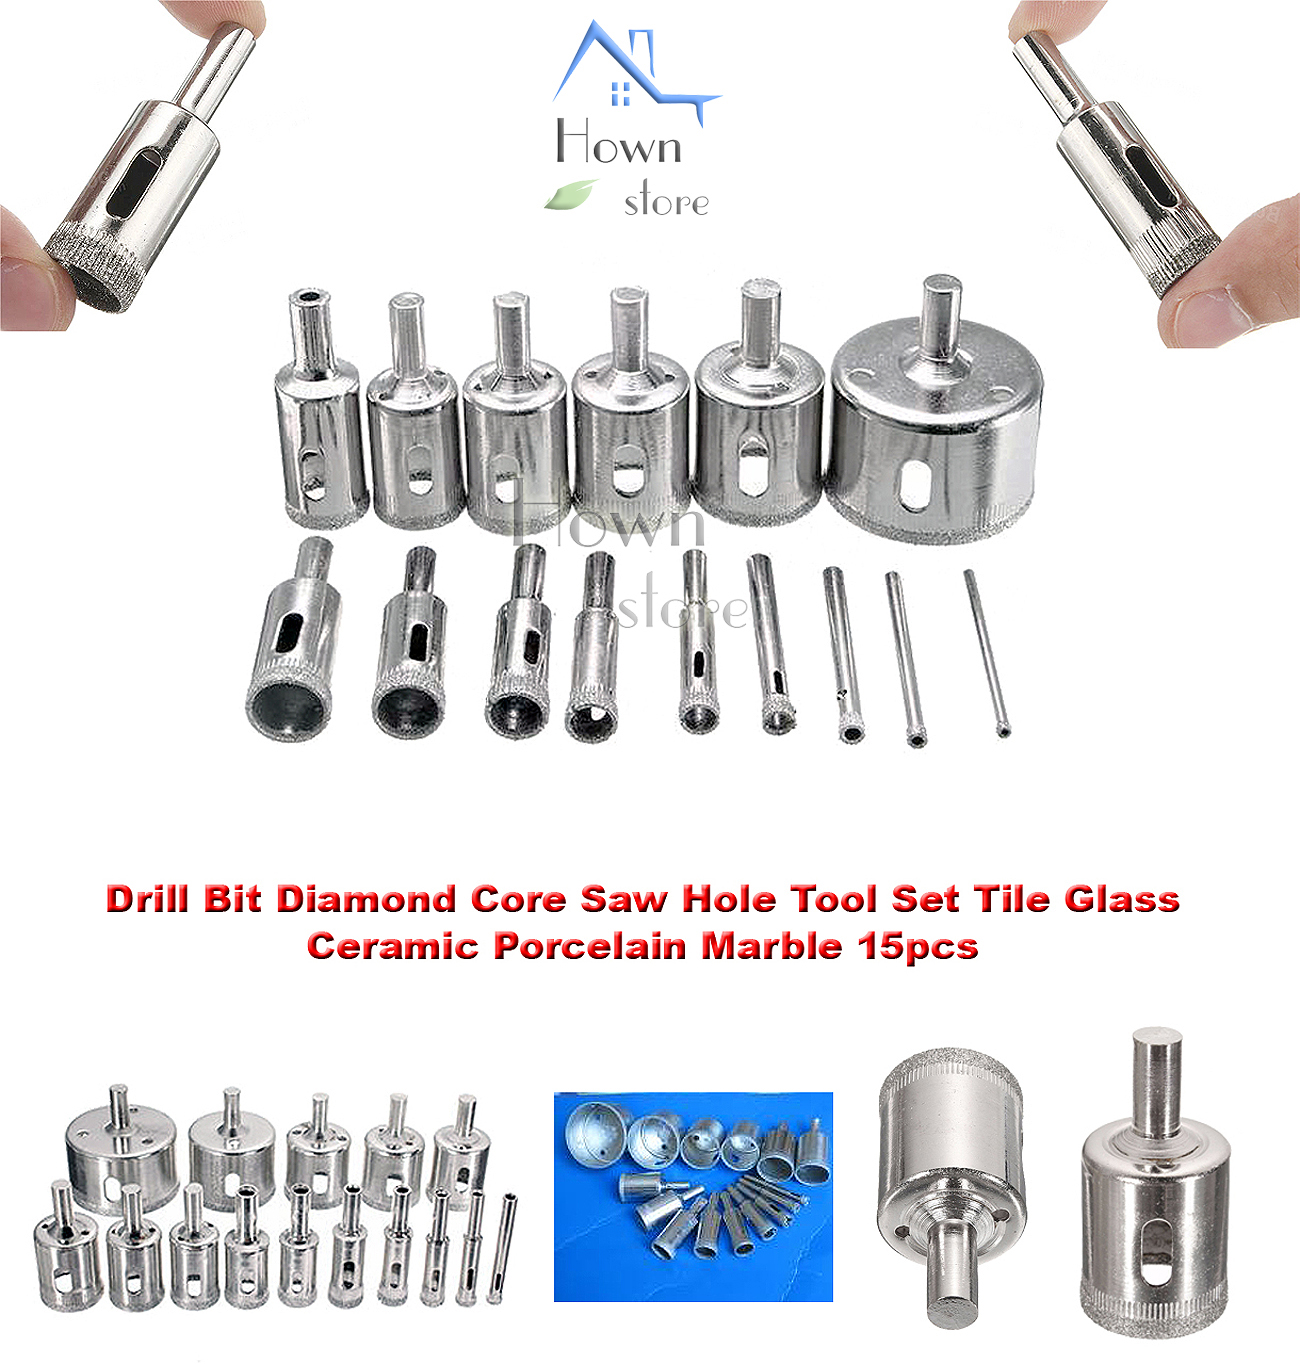 Diamond Drill Bit Core Dust Tip Hole Saw Hown - store | HOWN - STORE